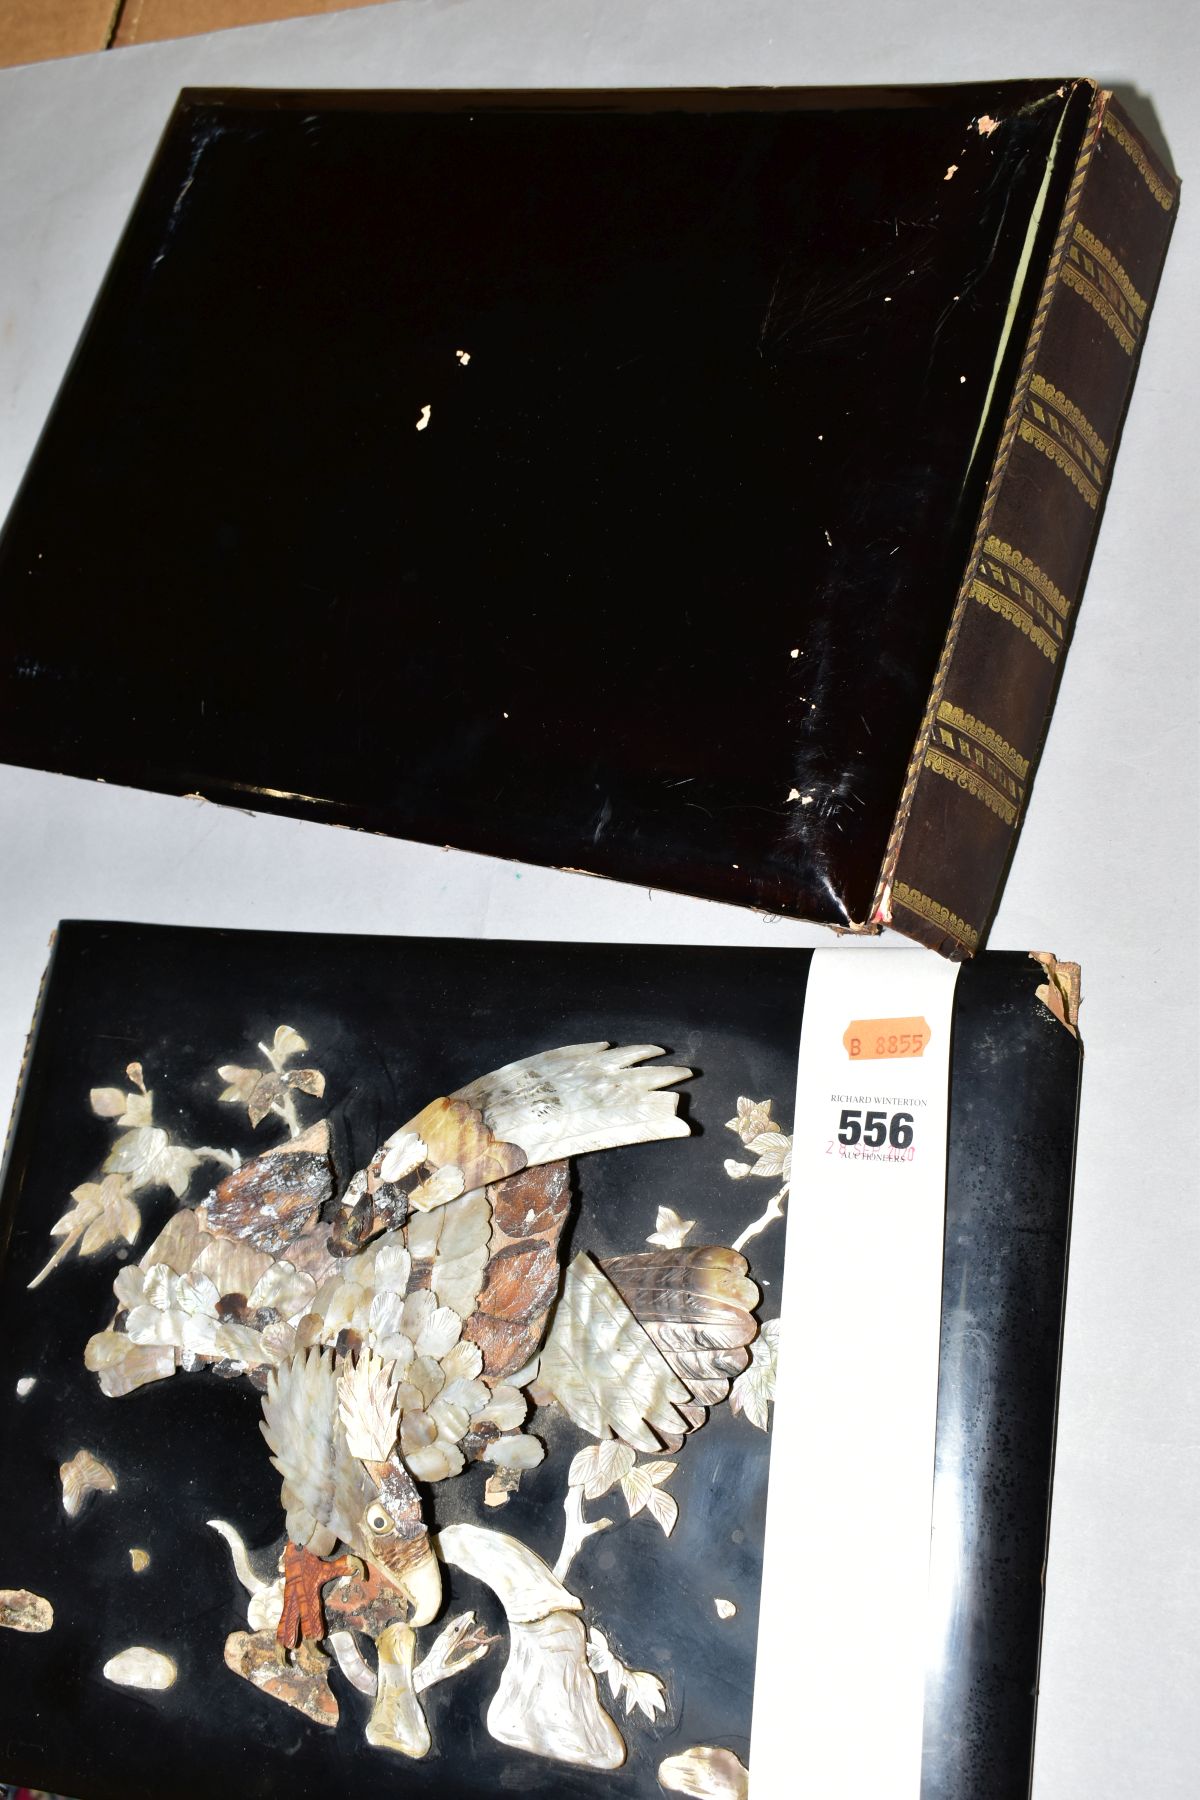 A SHIBYAMA LAQUERED PHOTOGRAPH/POSTCARD ALBUM, containing 20 leaves of painted silk illustrations, - Image 8 of 8